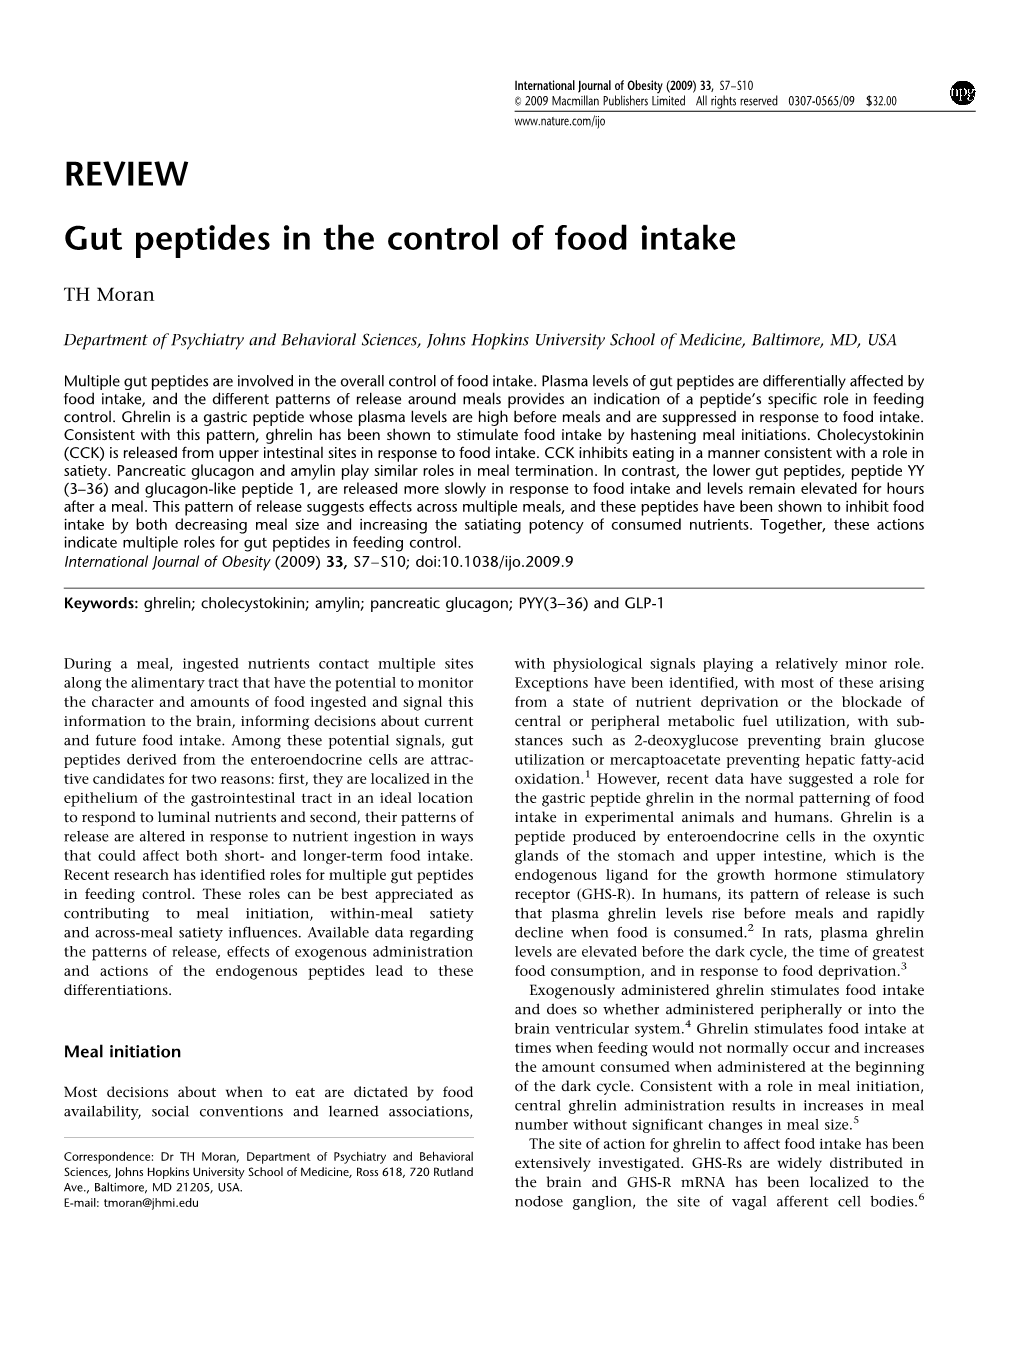 Gut Peptides in the Control of Food Intake